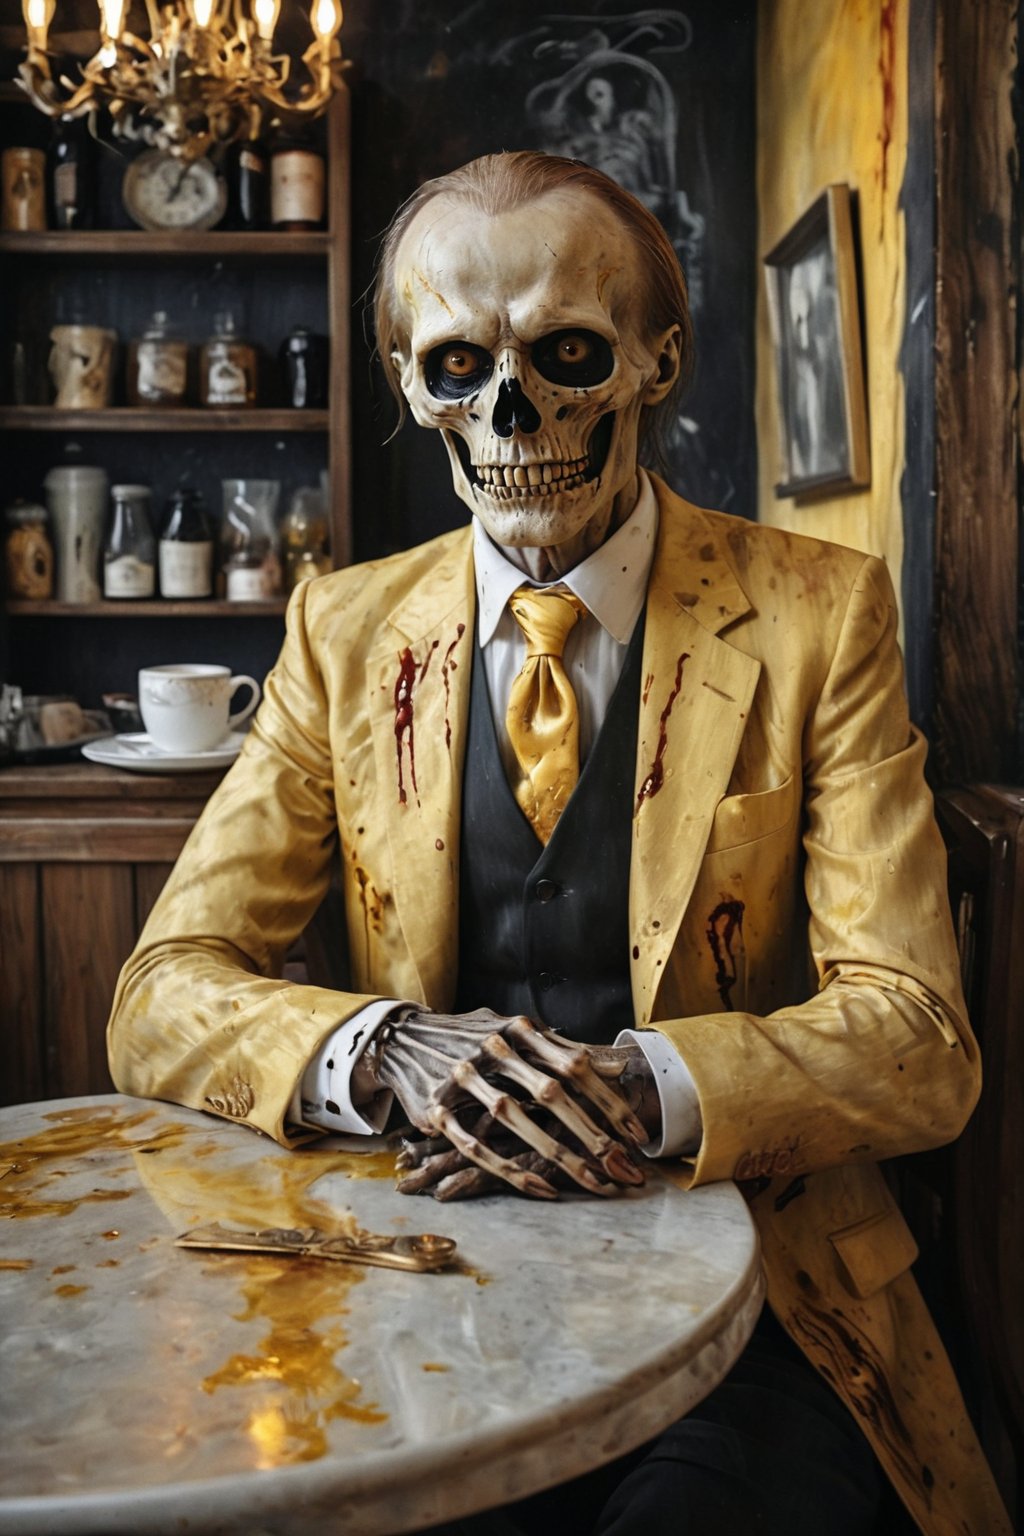  Death, the grim reaper as a creepy business man in blood stained yellow luxurious suit, skeleton face, black hole eyes, gold embroidered tie, sitting in a small fancy cafe in a European city,  portrait, half body portrait, holding out his hand to shake, eerie, cinematic, moody lights,style of Edvard Munch,Edvard Munch style